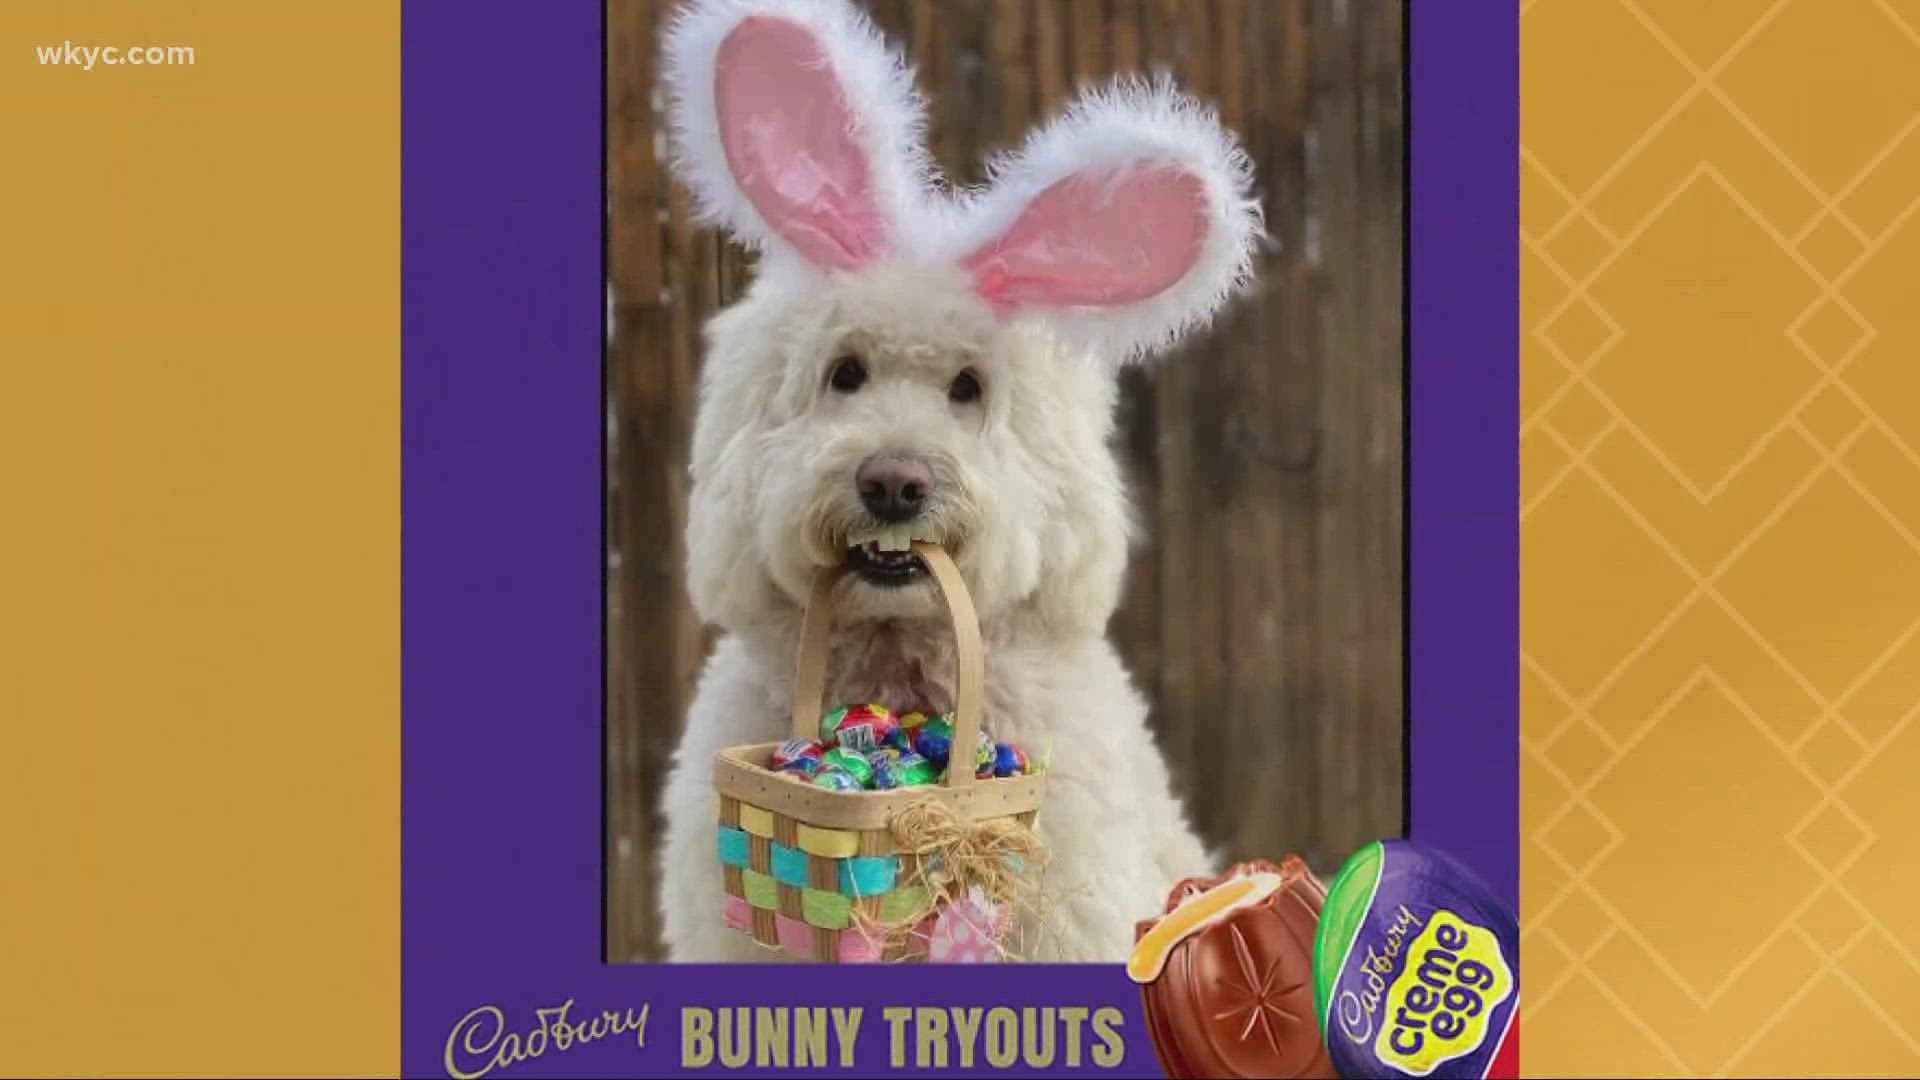 An Ohio pup named Annie Rose has won a starring role in the 2022 Cadbury Bunny commercial.